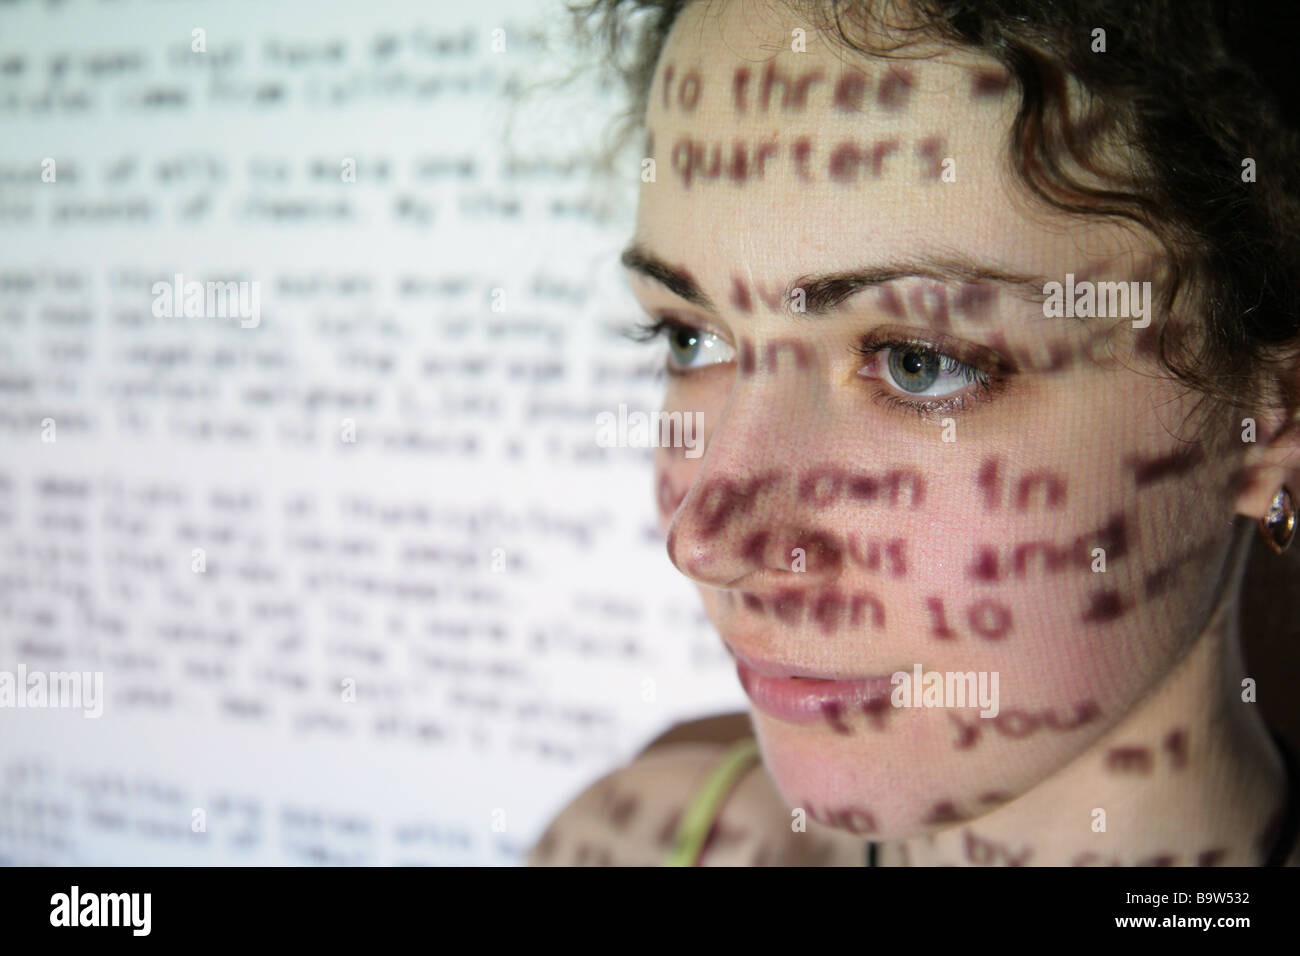 text is projected on face of woman Stock Photo